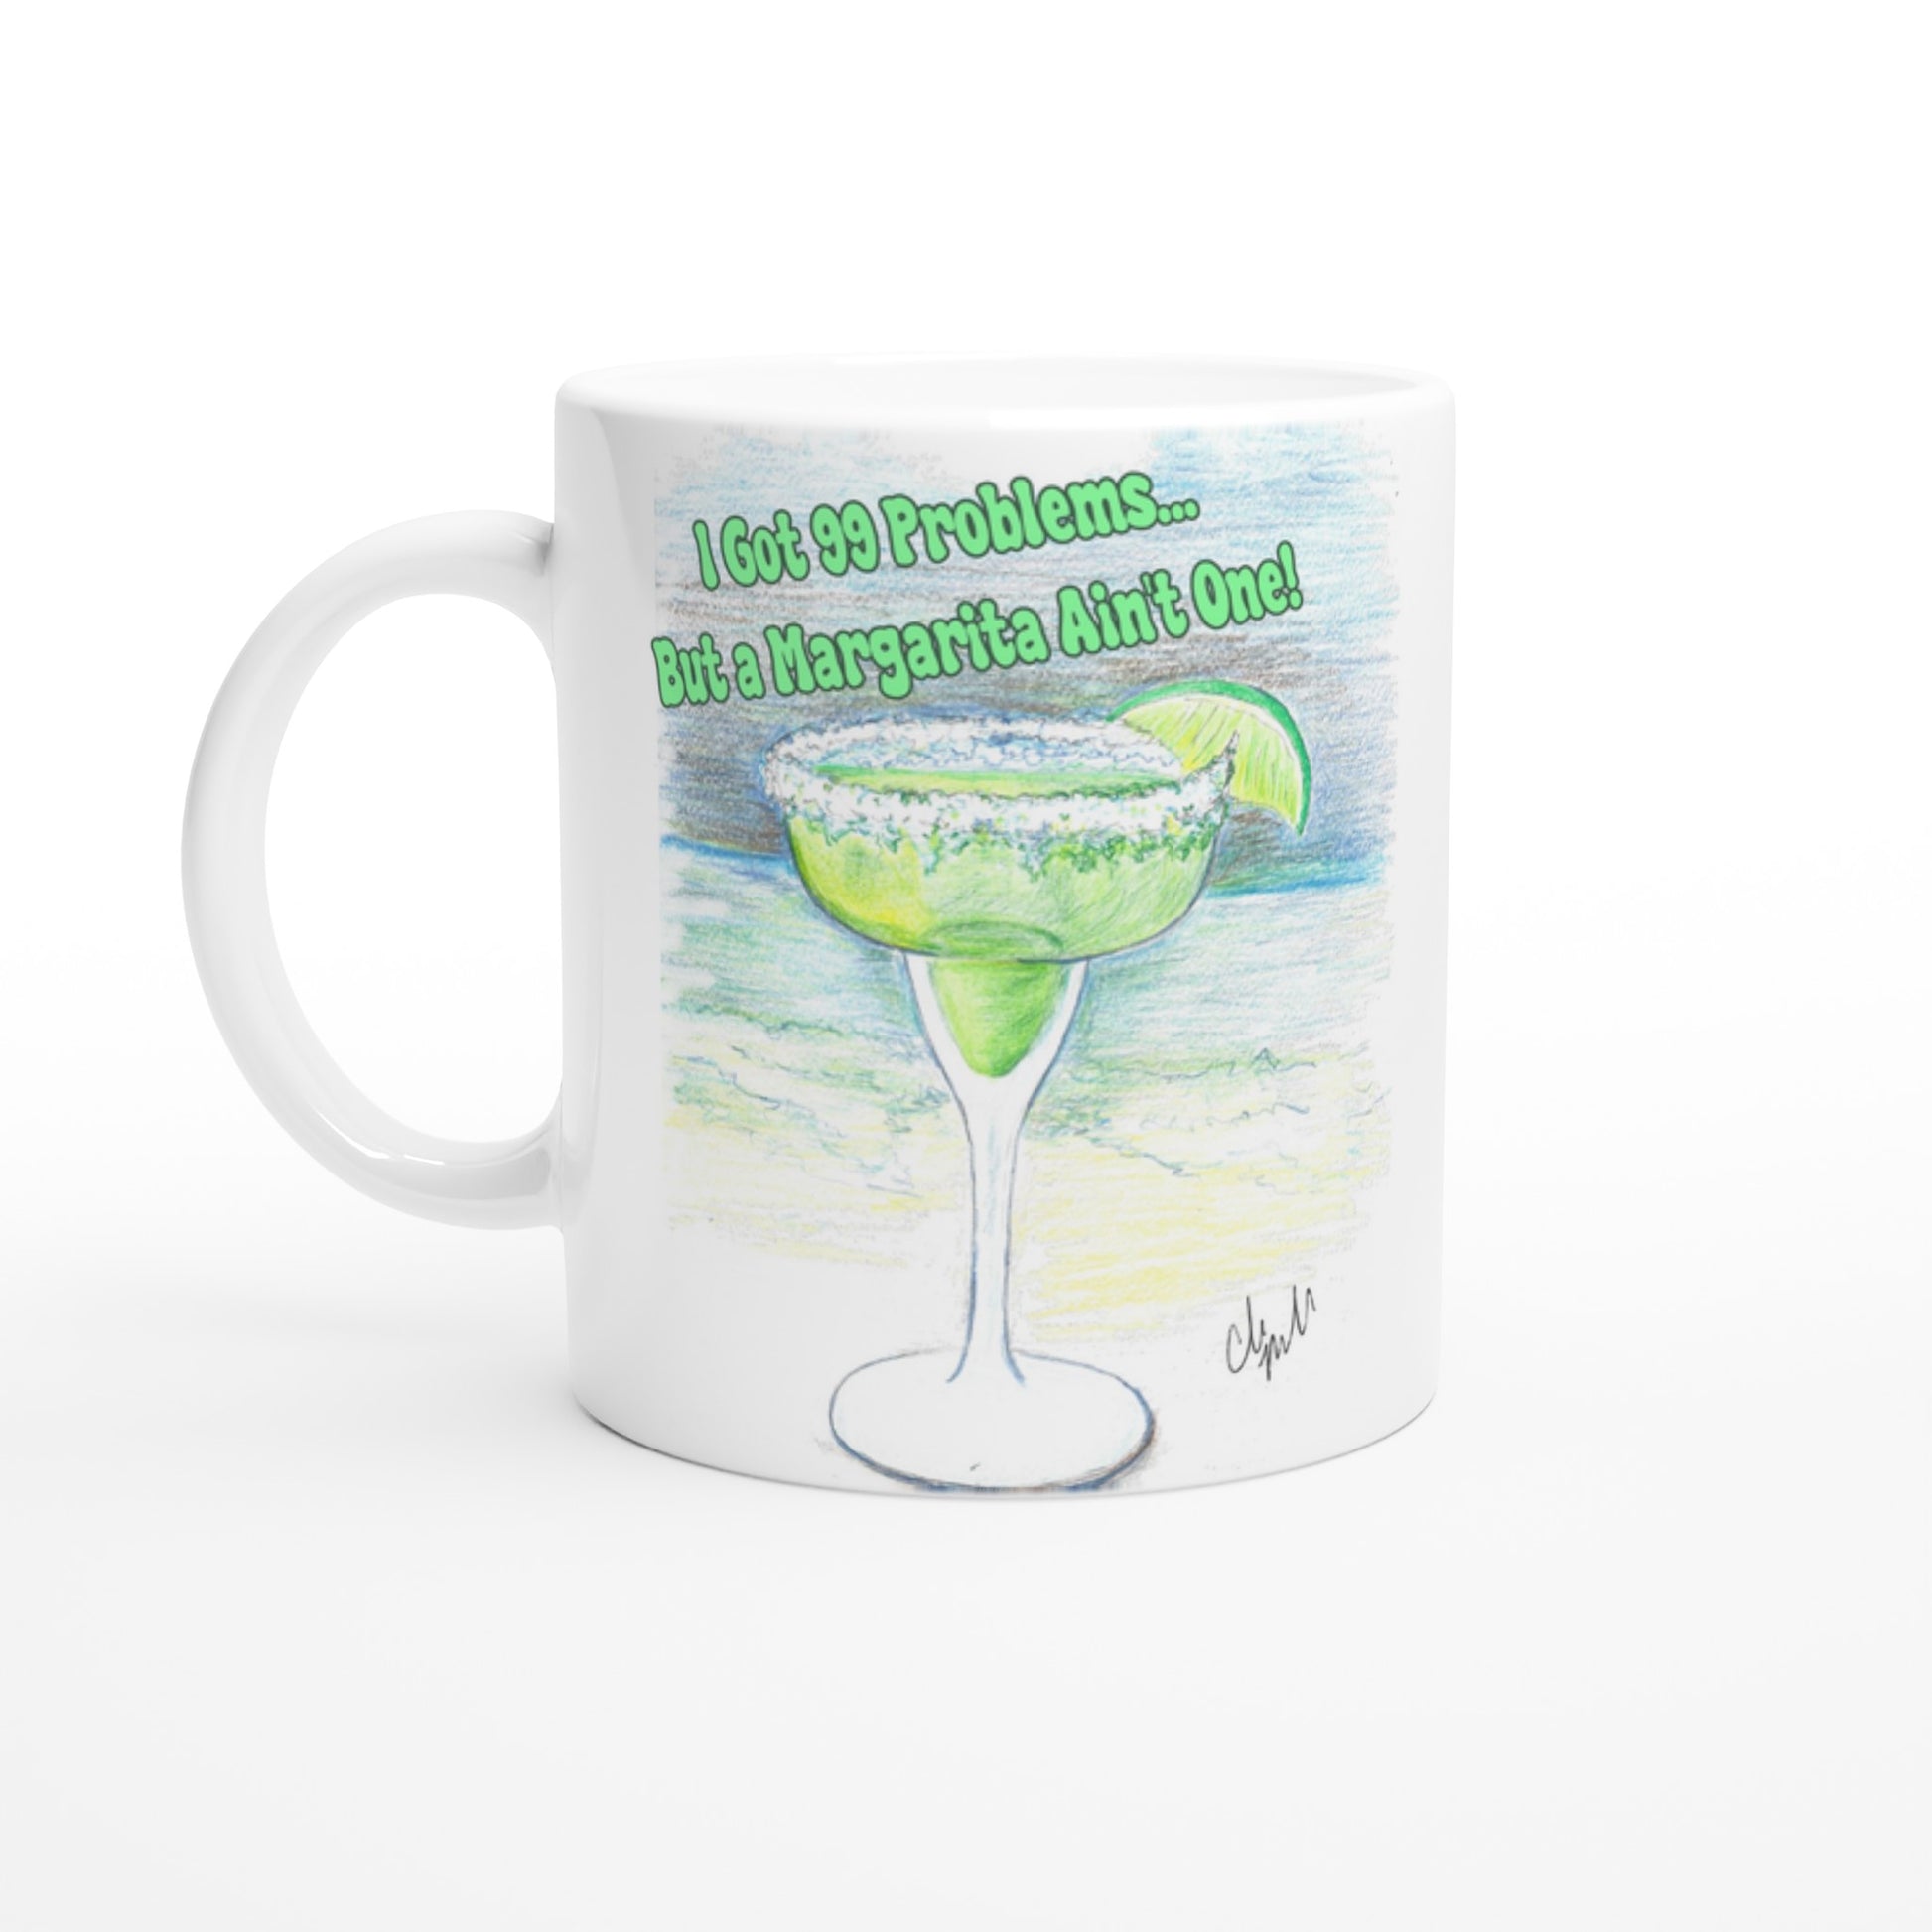 White ceramic 11oz mug with motto I Got 99 Problems But a Margarita Aint One front side WhatYa Say logo on back dishwasher and microwave safe ceramic coffee mug from WhatYa Say Apparel front view.